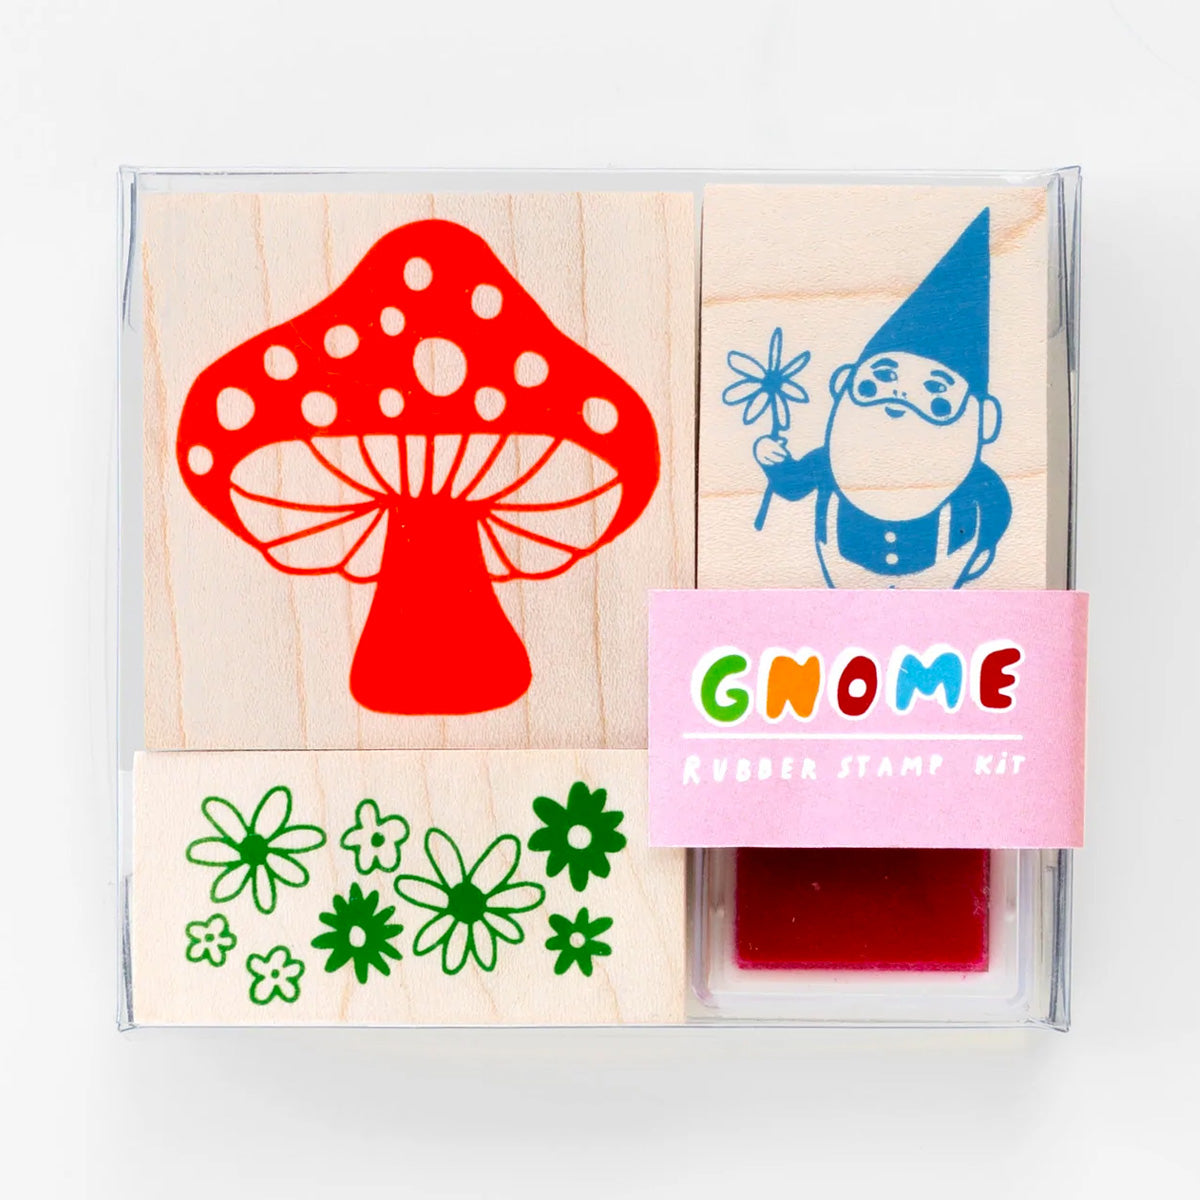 Three rubber stamps with a gnome, mushroom and some flowers.